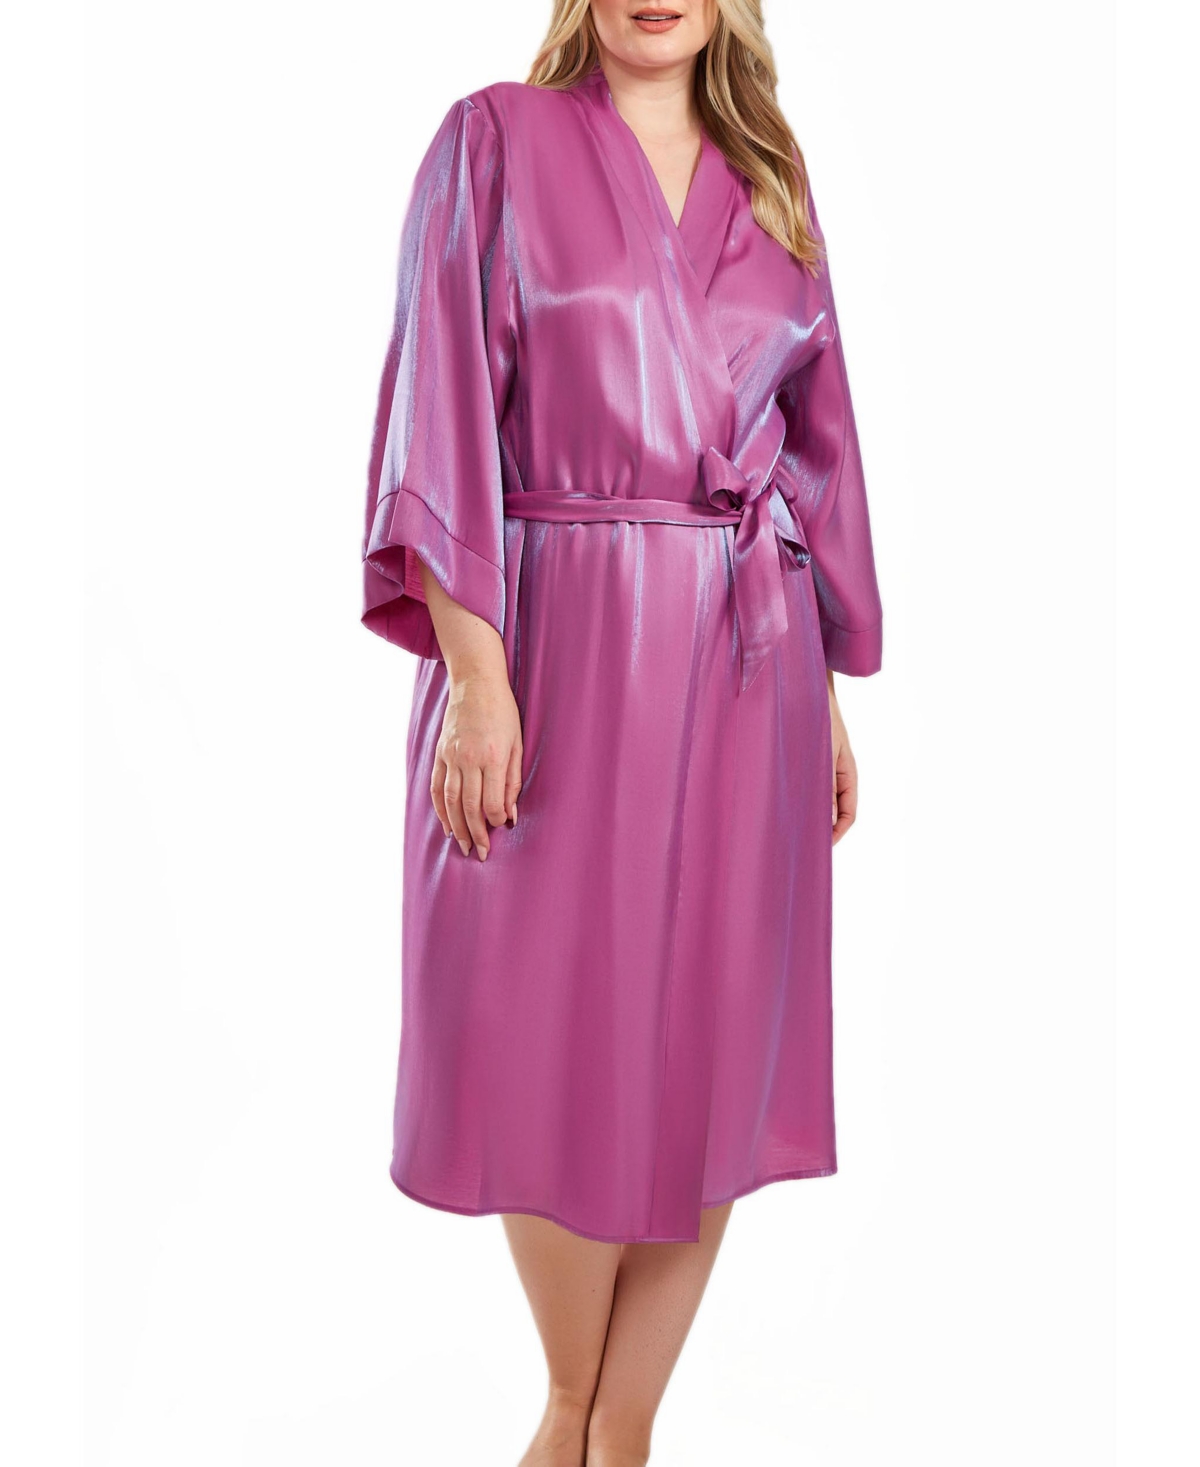 Icollection Skyler Plus Size Irredesant Robe With Self Tie Sash And Inner Ties In Purple